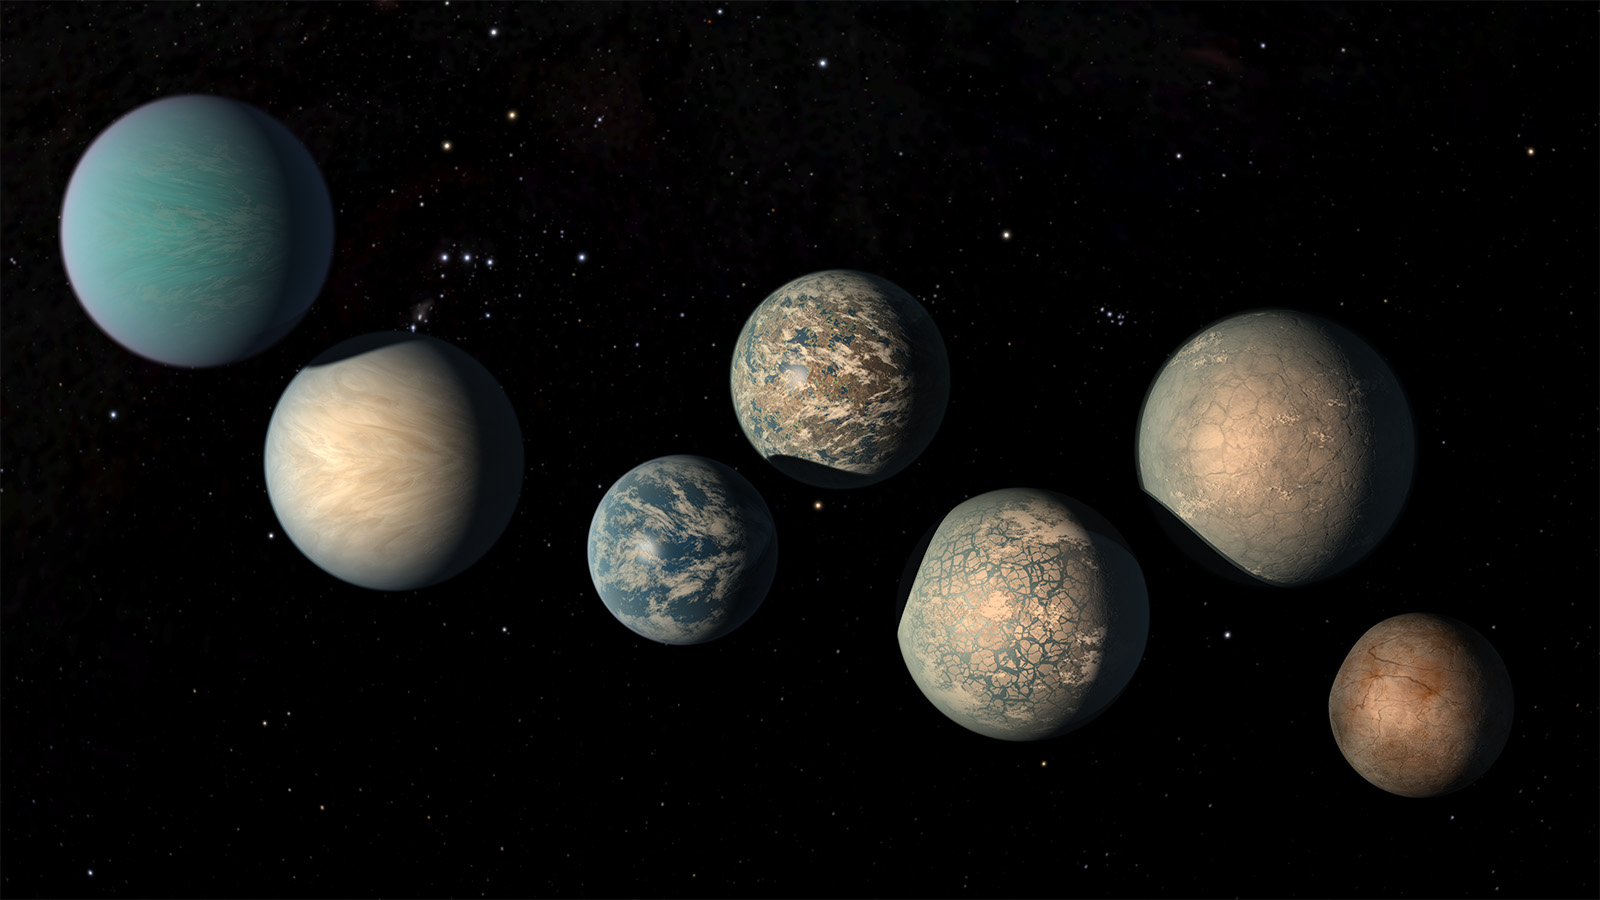 Trappist 1 Planet Wallpapers